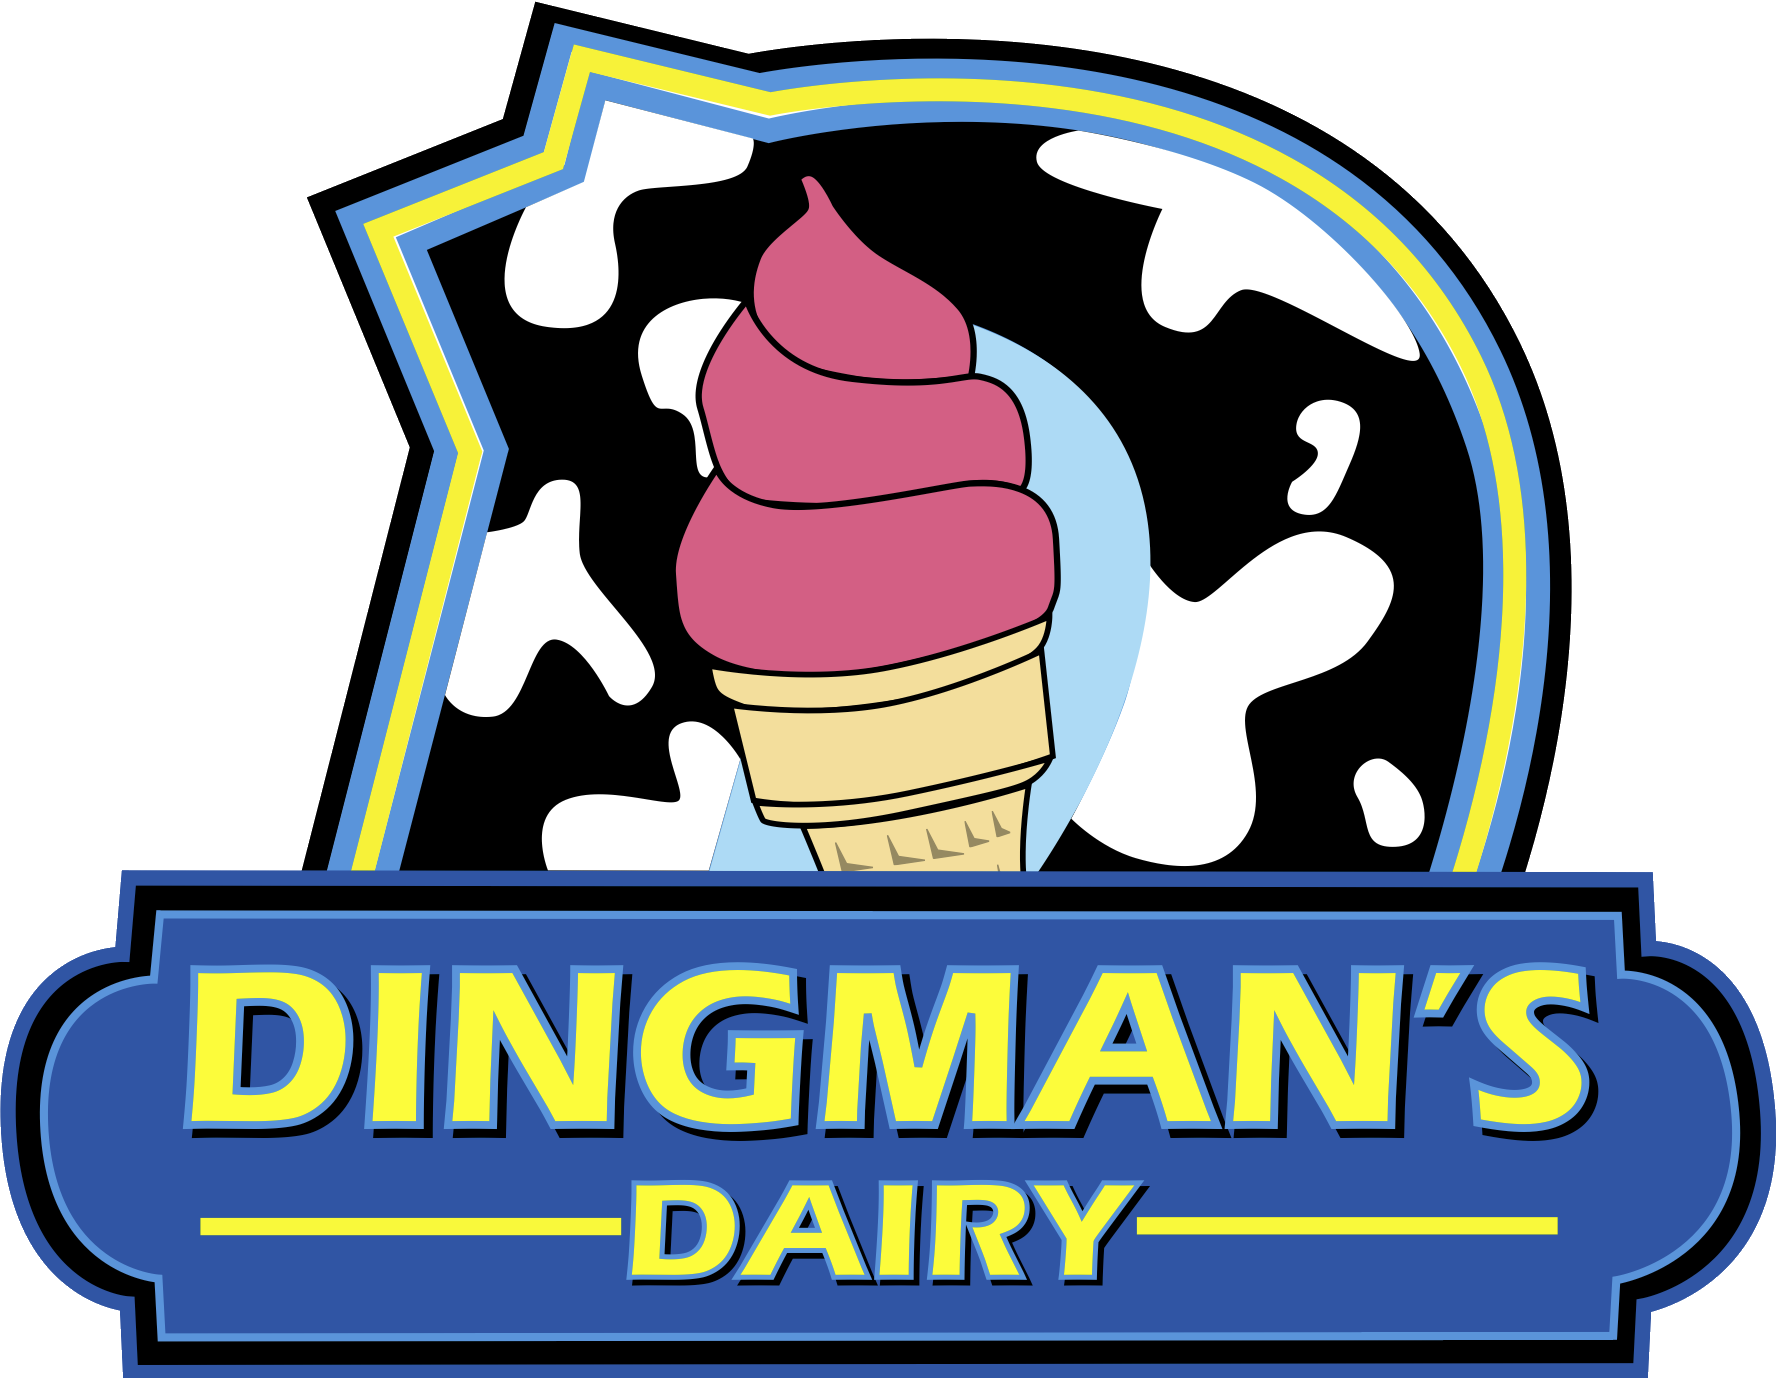 Based Out Of Paterson, Dingmans Dairy Offer Local Delivery - Dingman's Dairy (1776x1378)